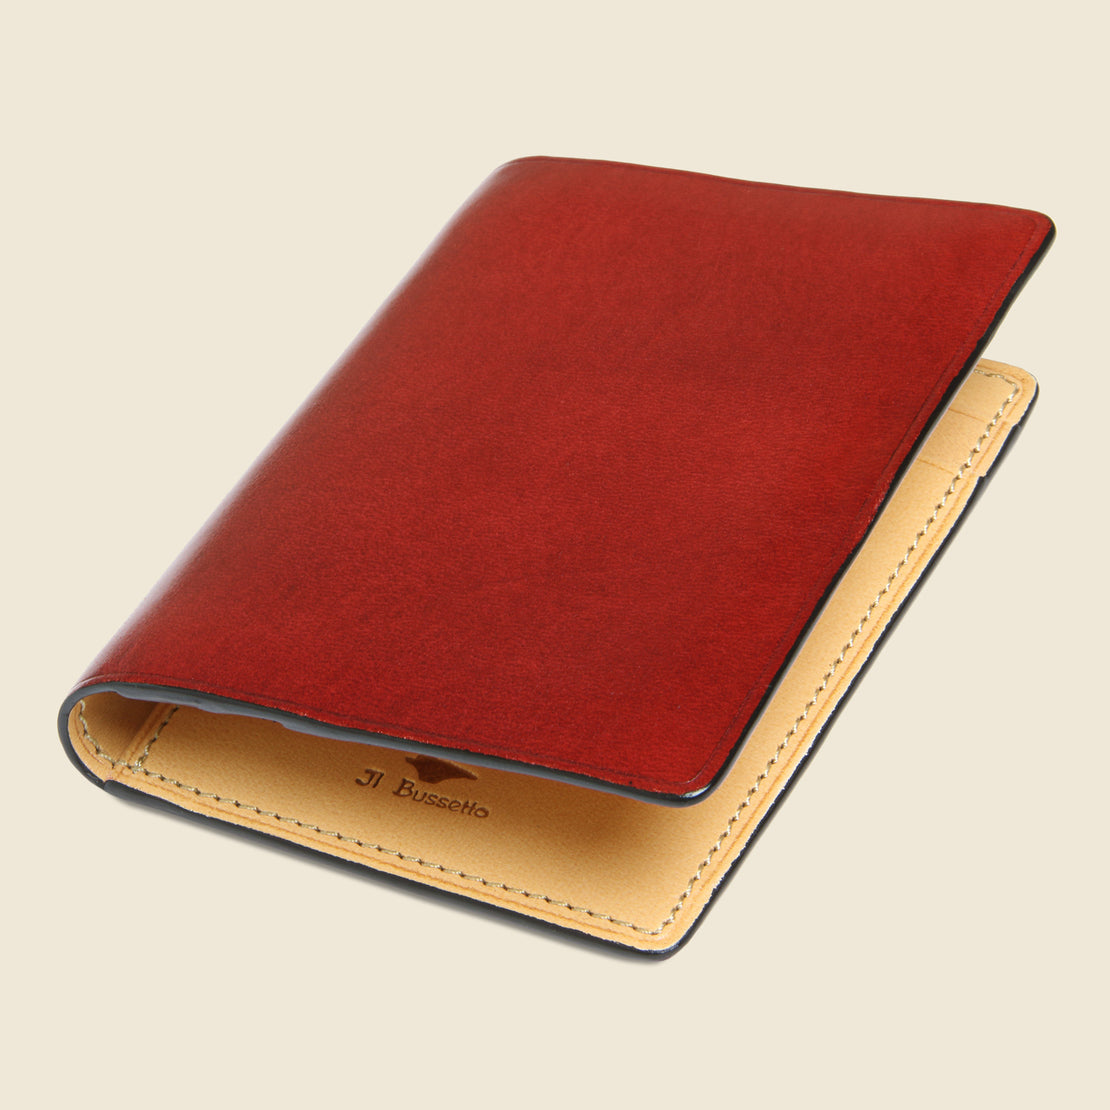 Bi-Fold Card Case - Red - Il Bussetto - STAG Provisions - Accessories - Wallets